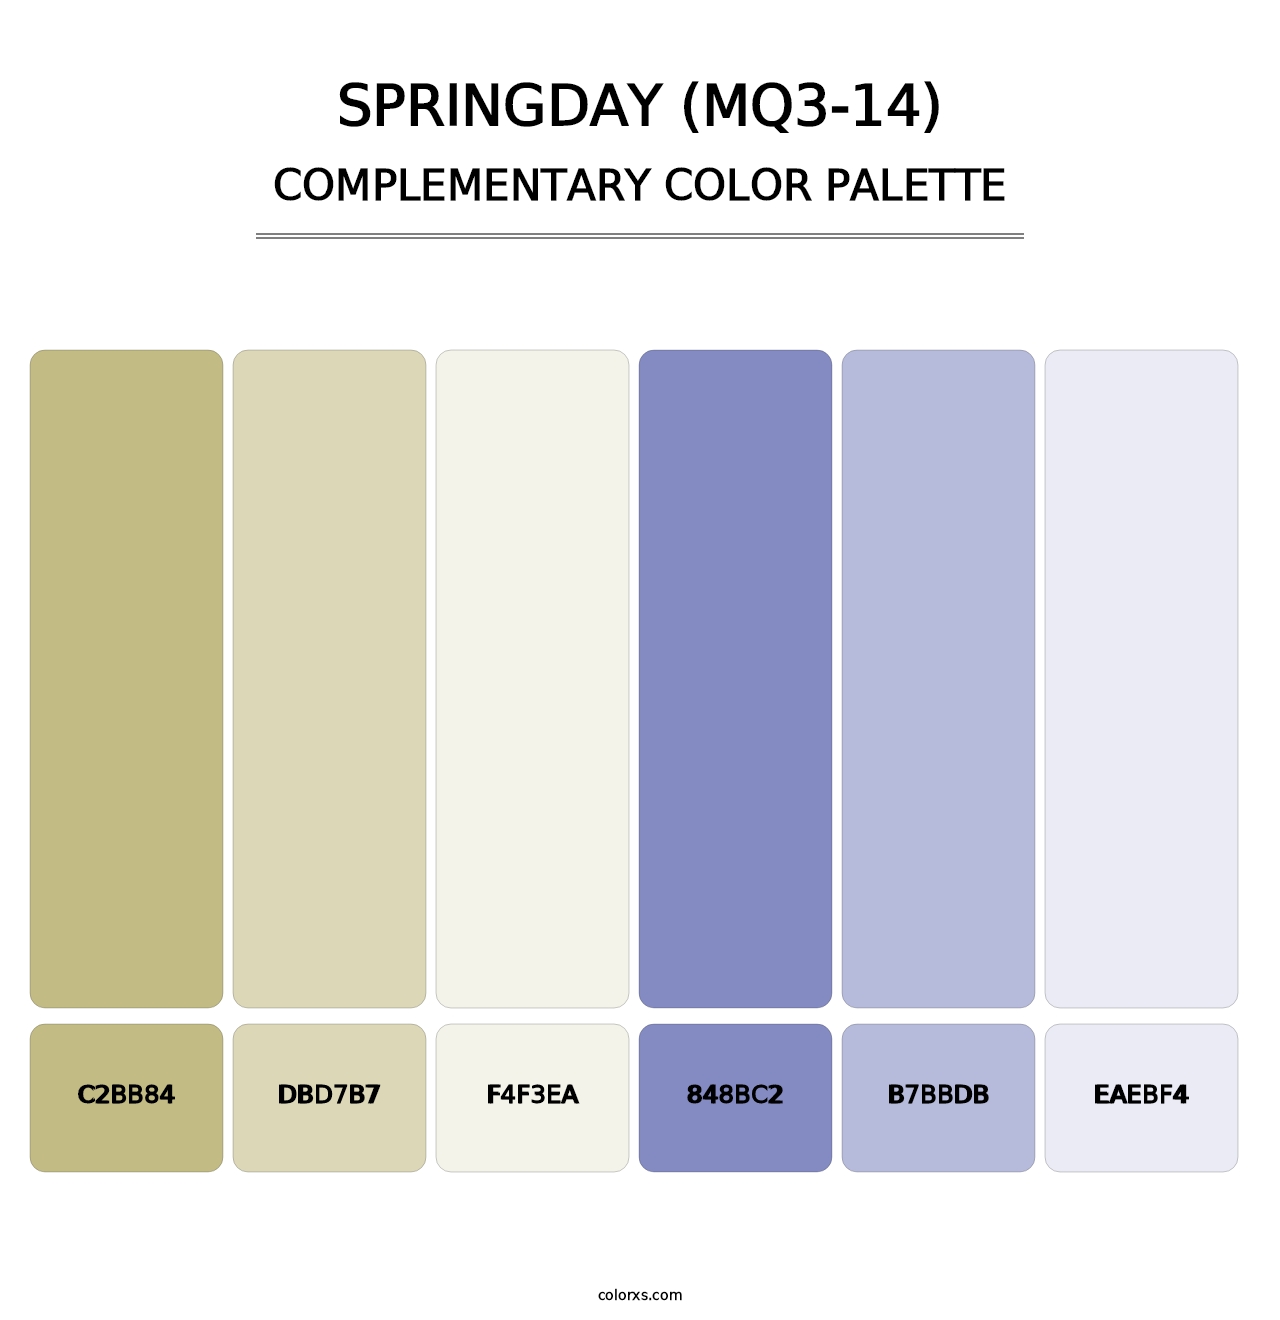 Springday (MQ3-14) - Complementary Color Palette